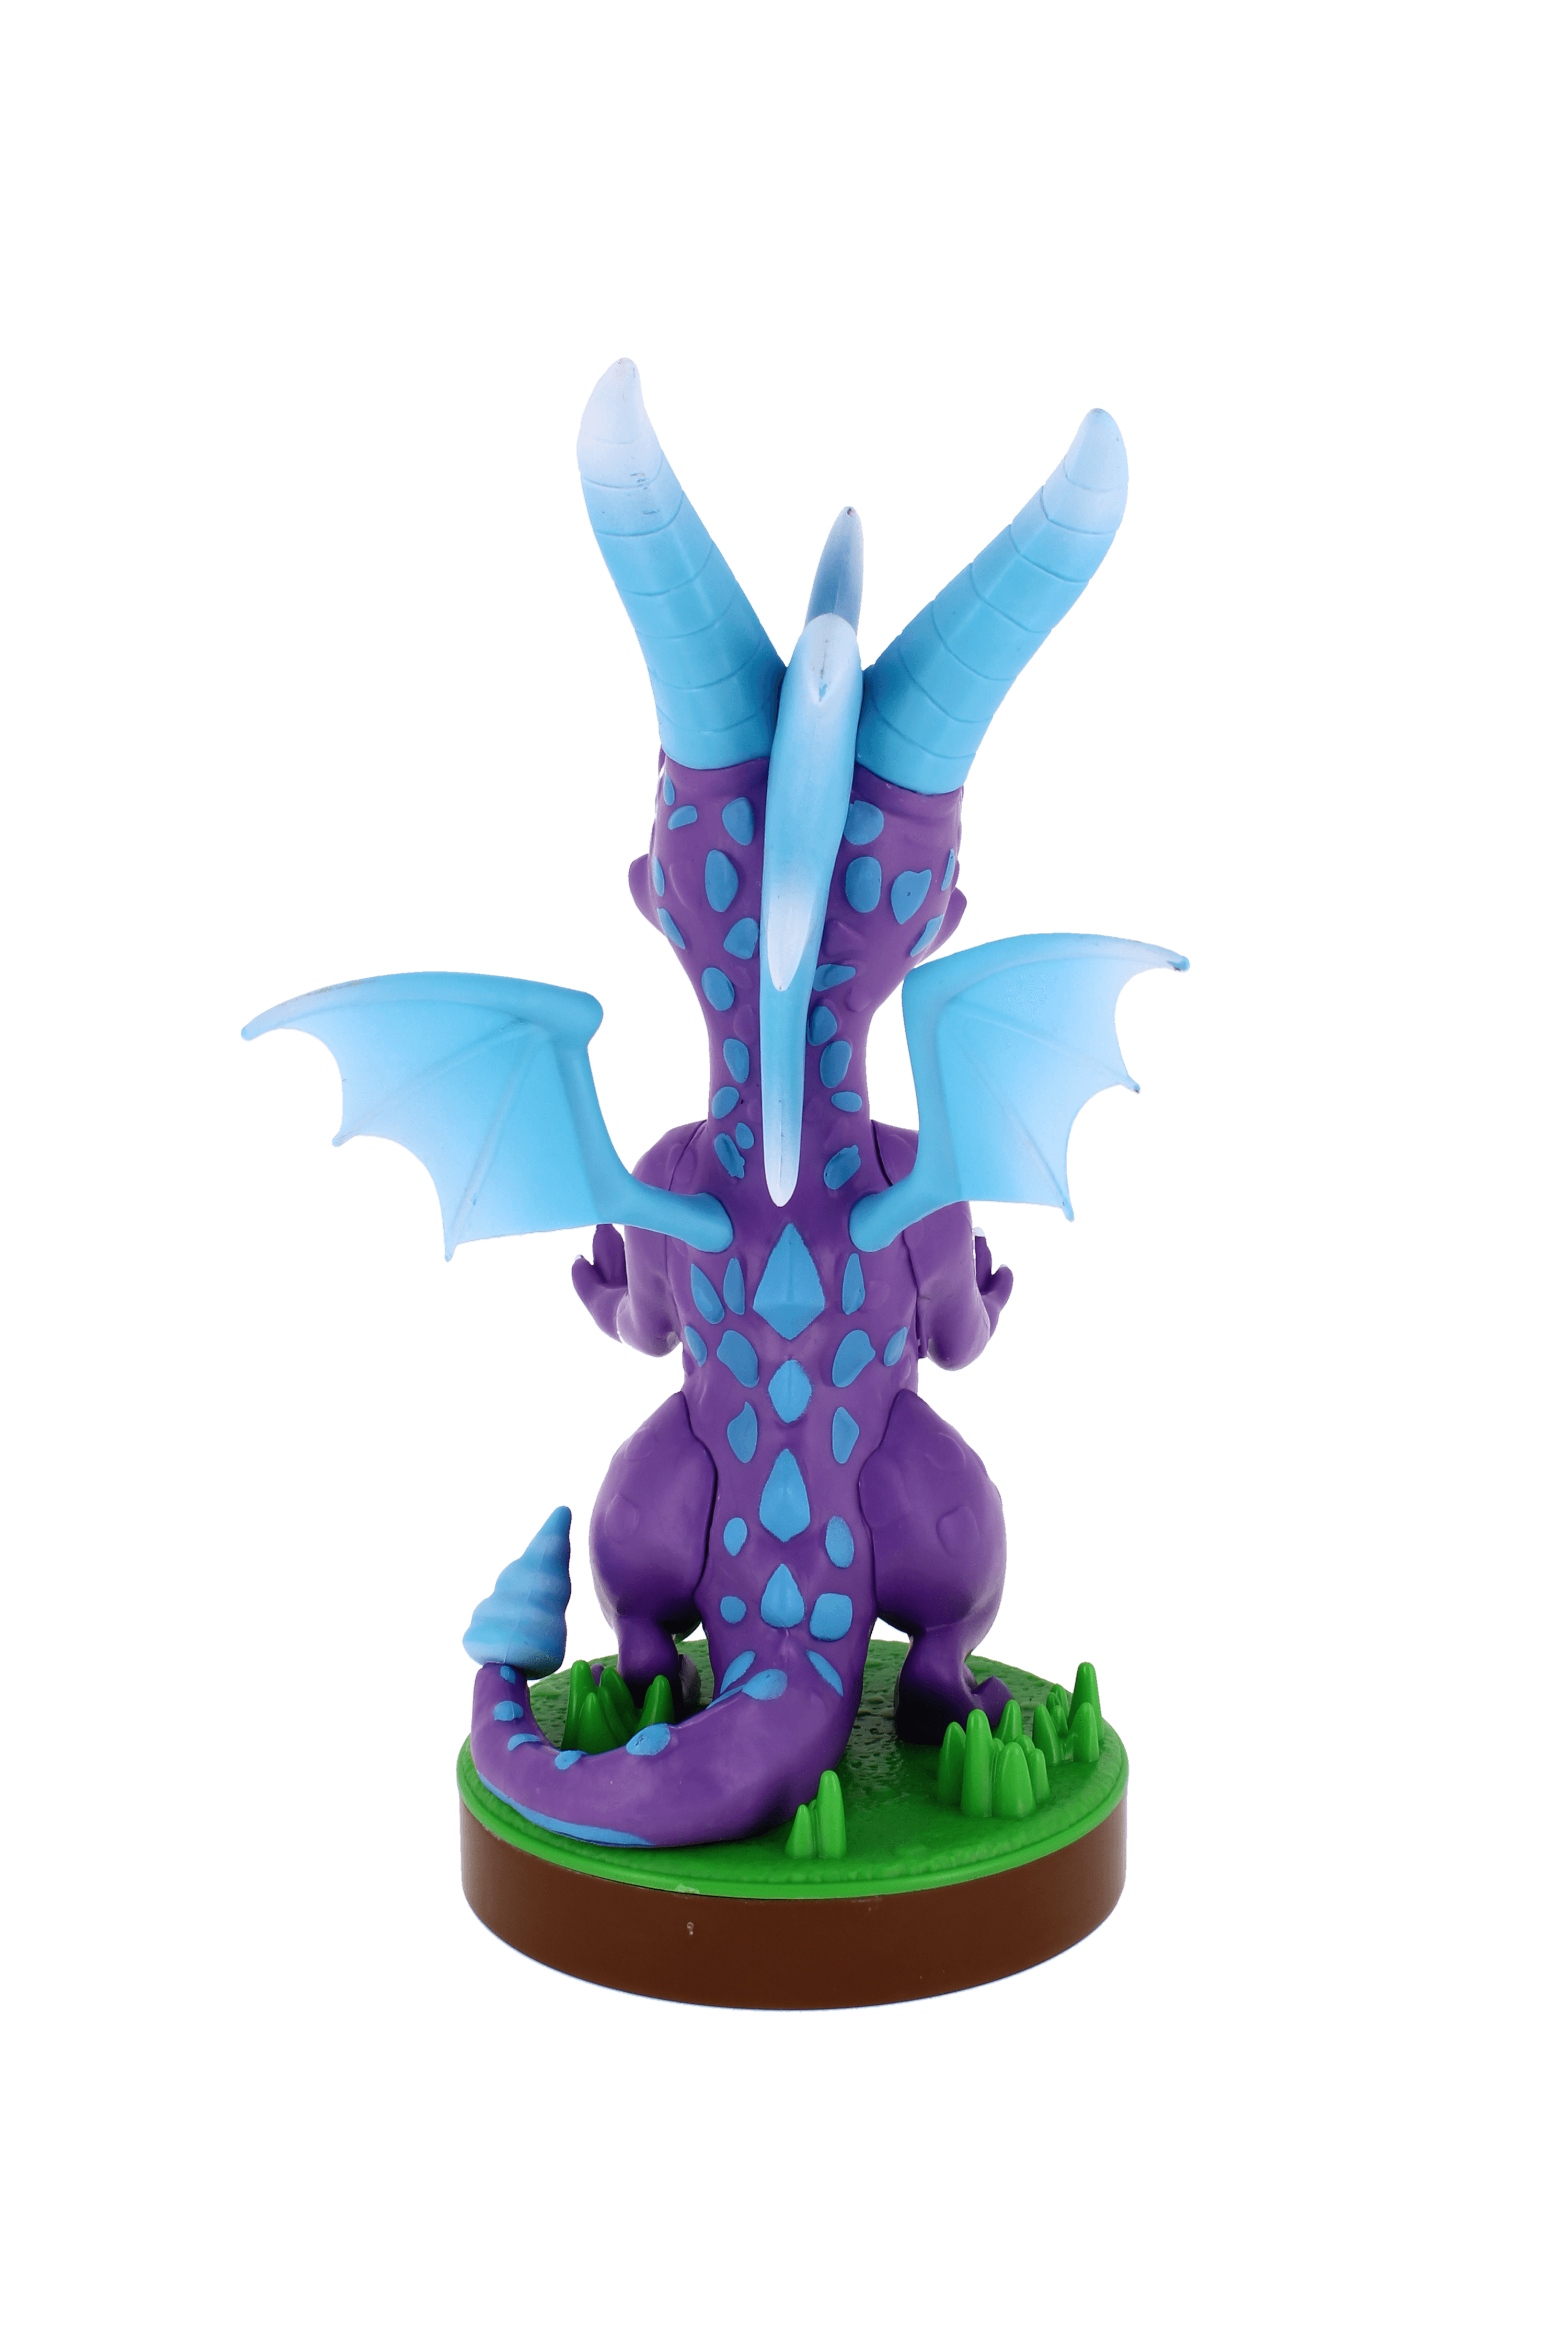 Cable Guys - Spyro the Dragon - Spyro (Ice) - Phone & Controller Holder - The Card Vault